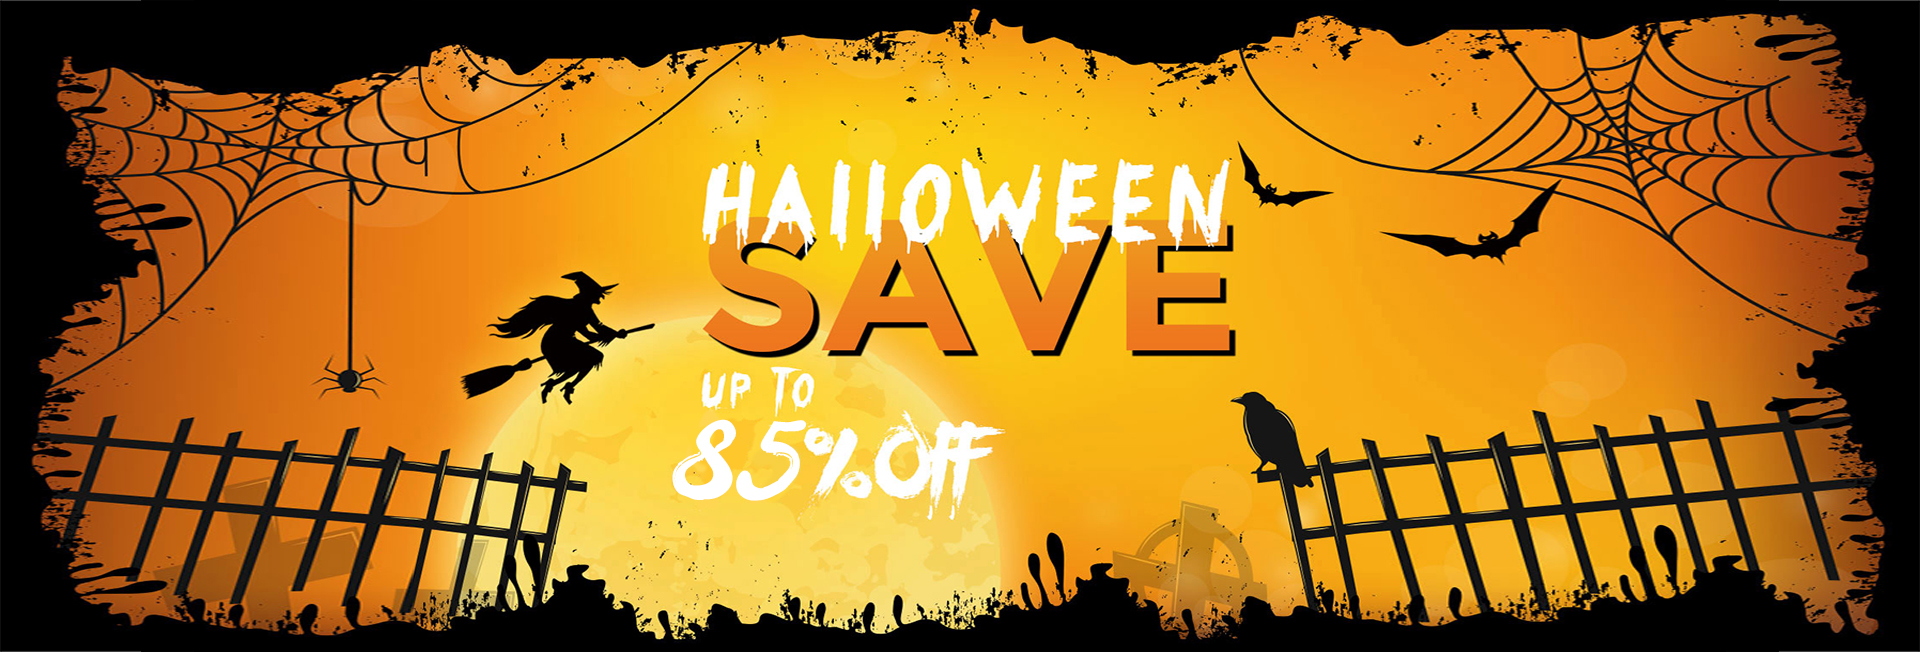 Halloween Sales Up To 85% Off